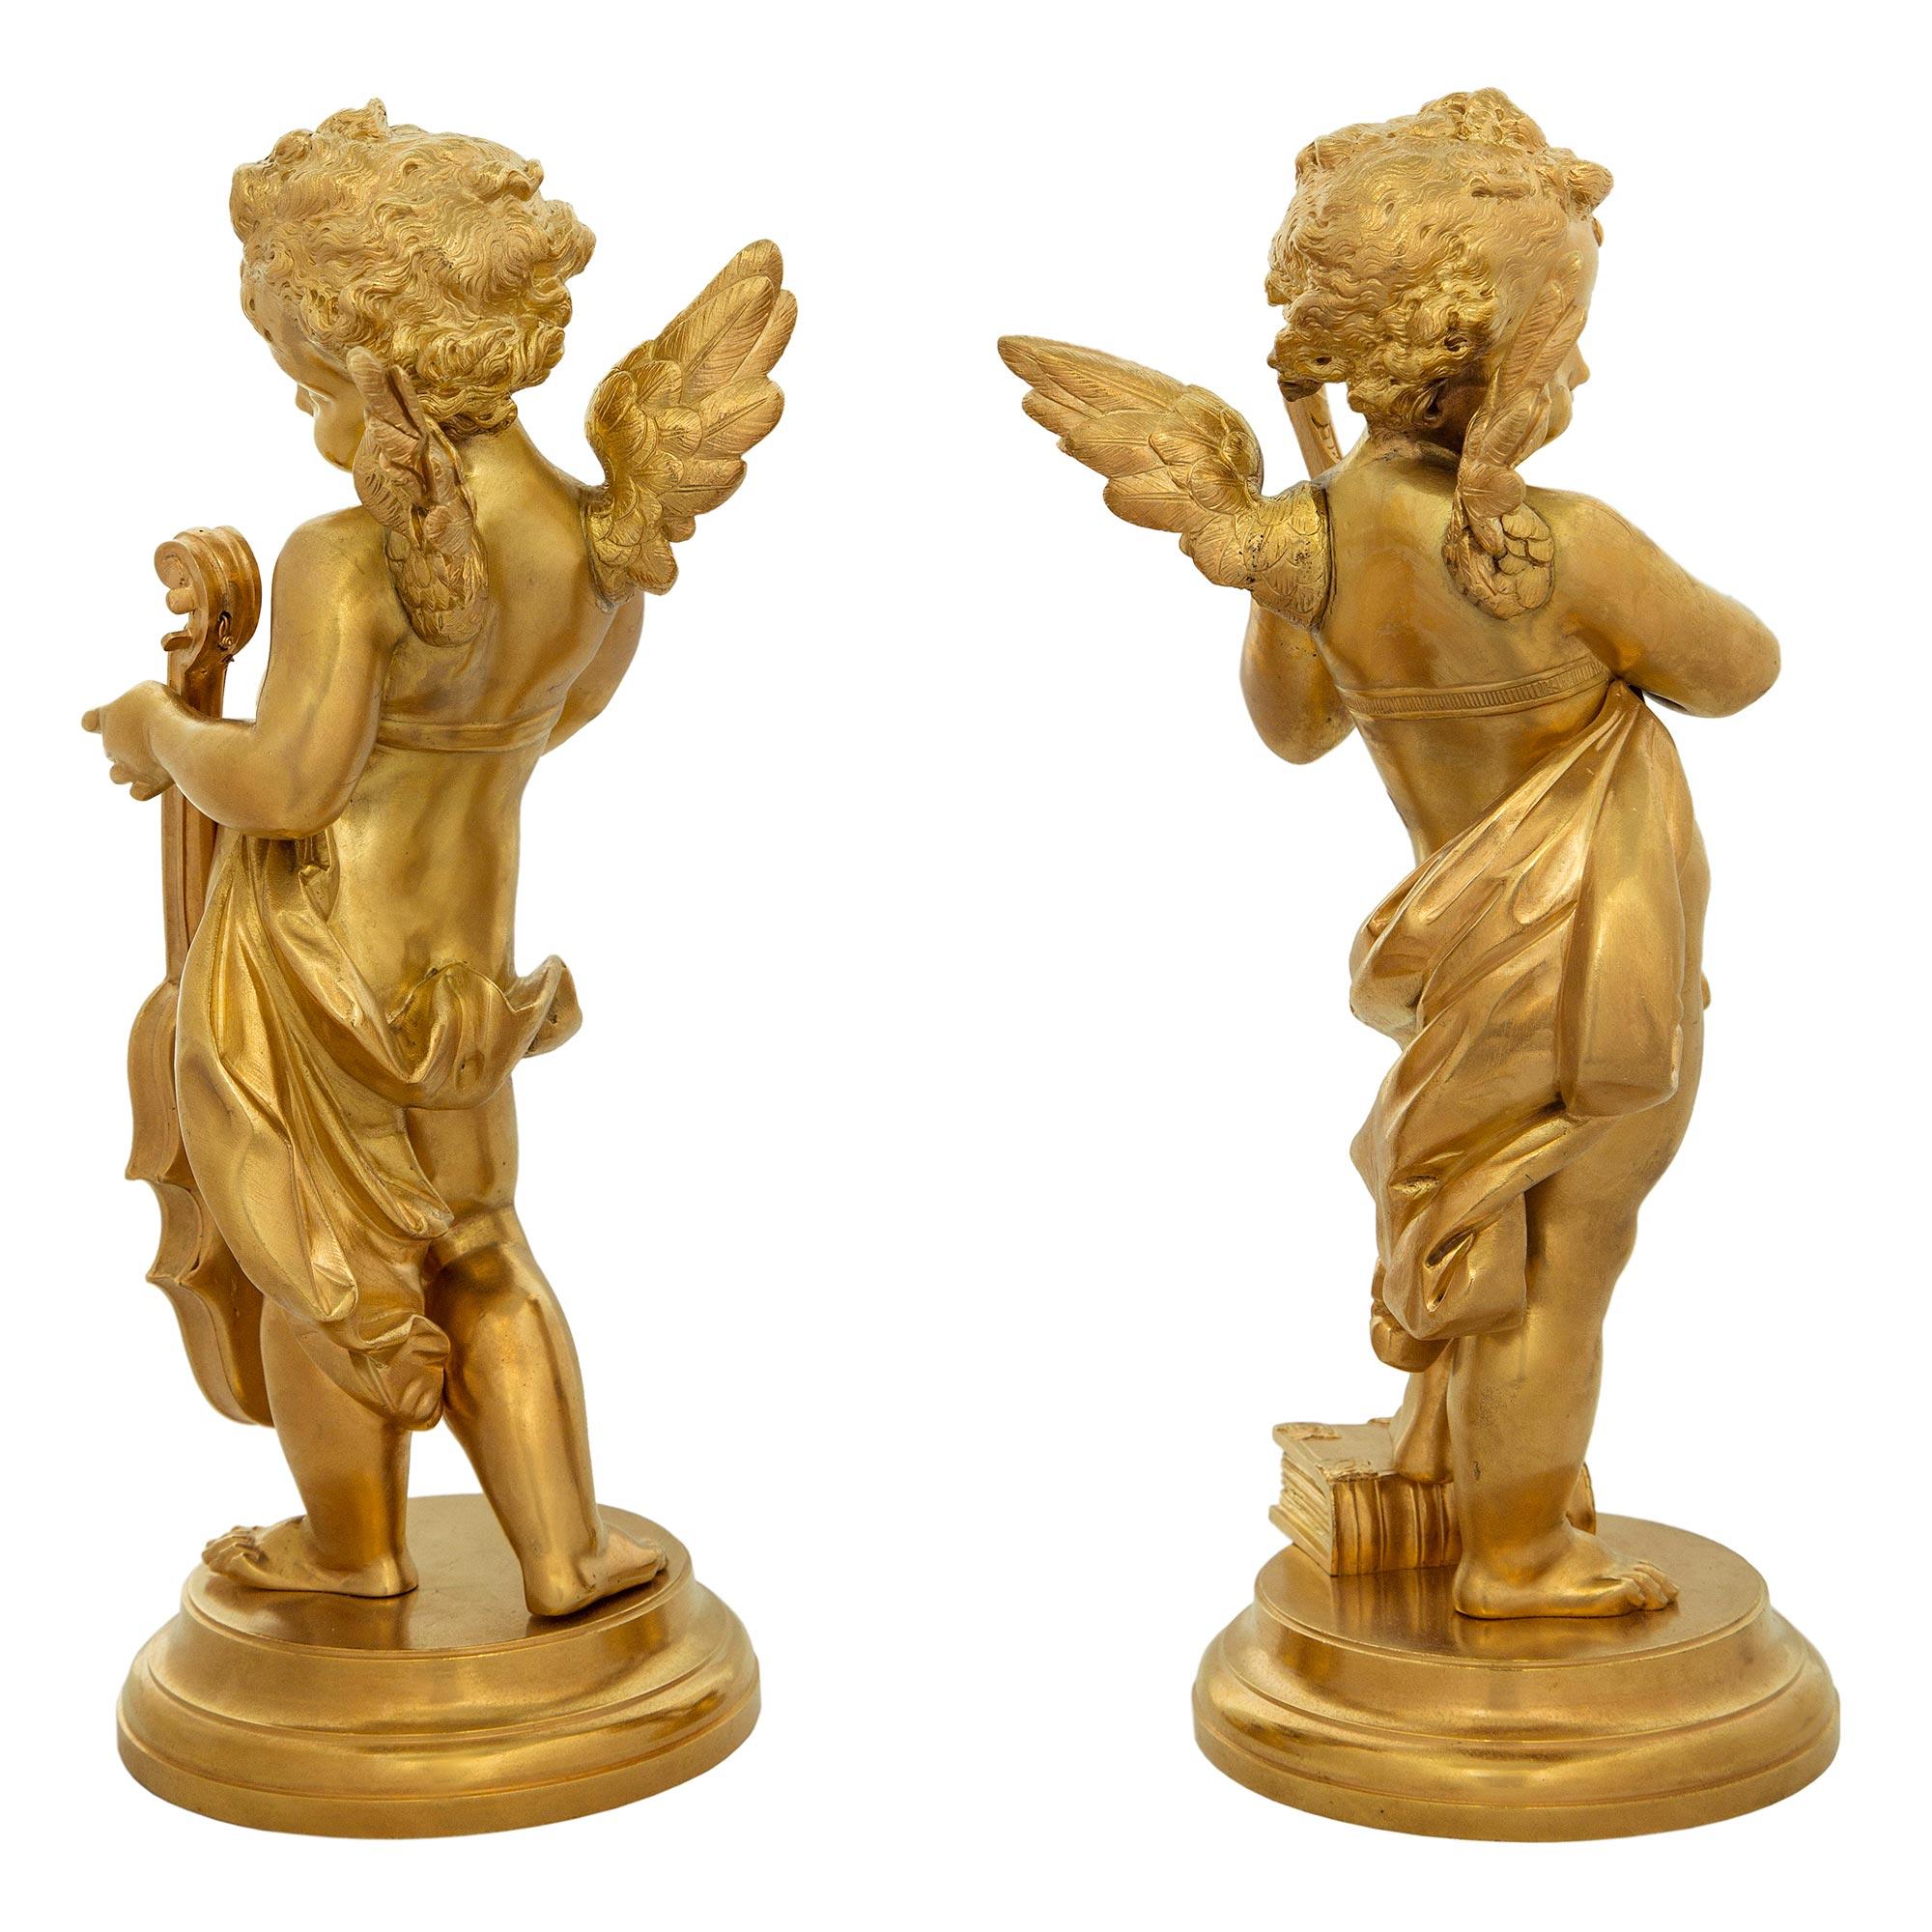 Pair of French 19th Century Louis XVI Style Ormolu Cherub Statues In Good Condition For Sale In West Palm Beach, FL